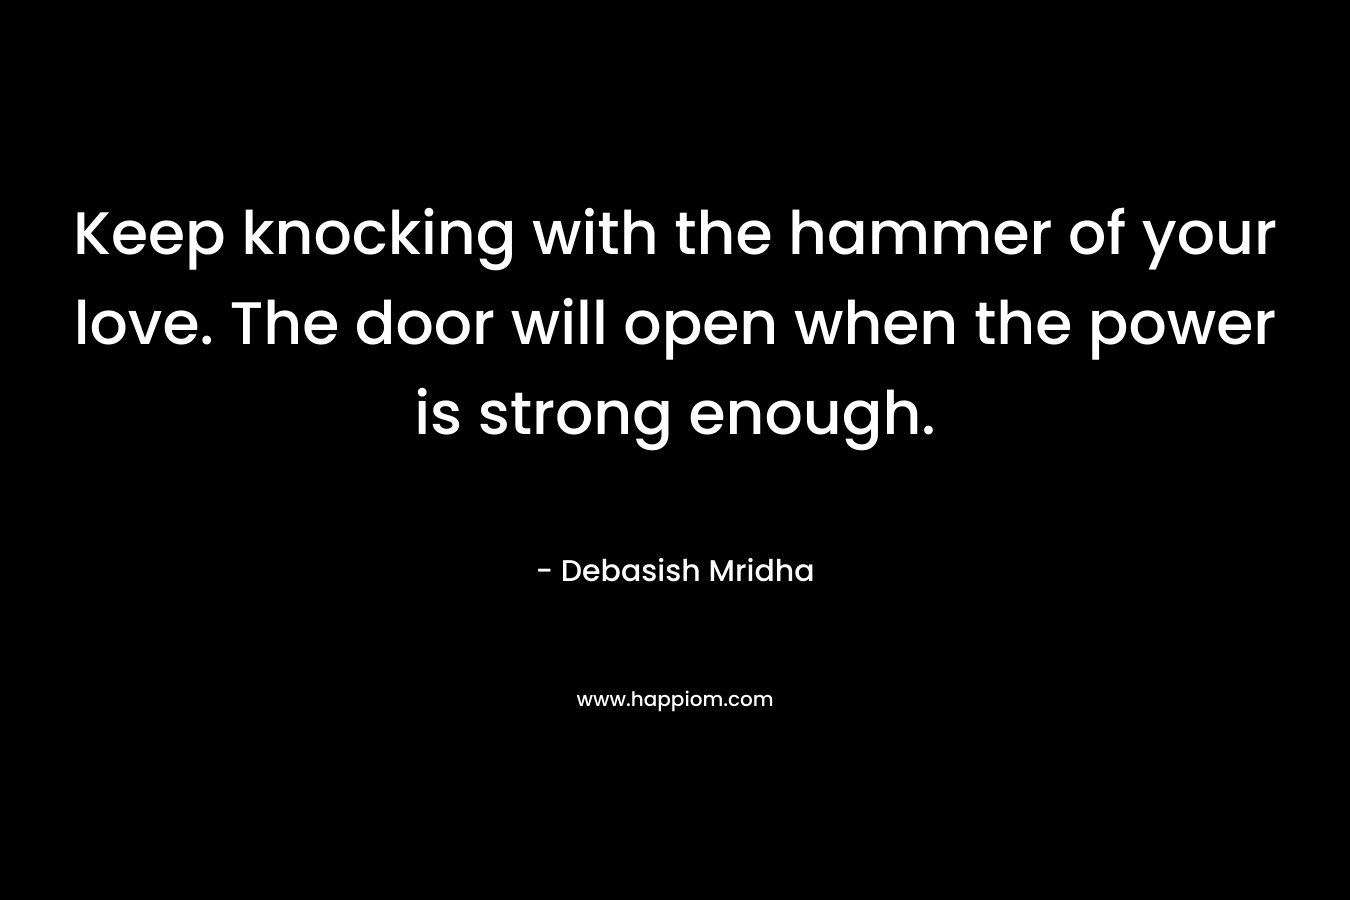 Keep knocking with the hammer of your love. The door will open when the power is strong enough.